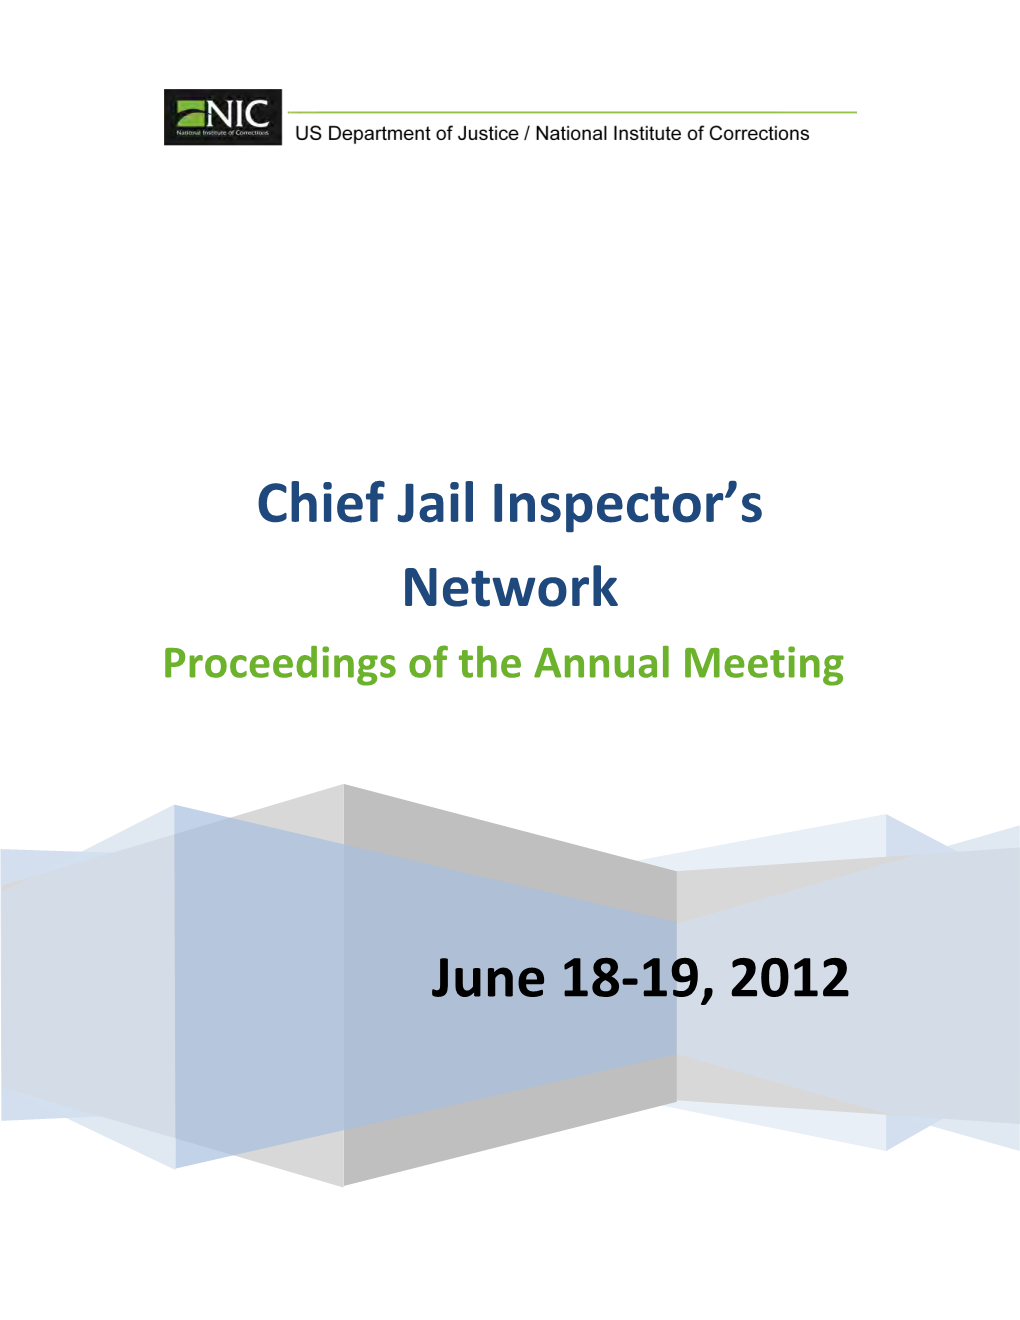 Chief Jail Inspector's Network